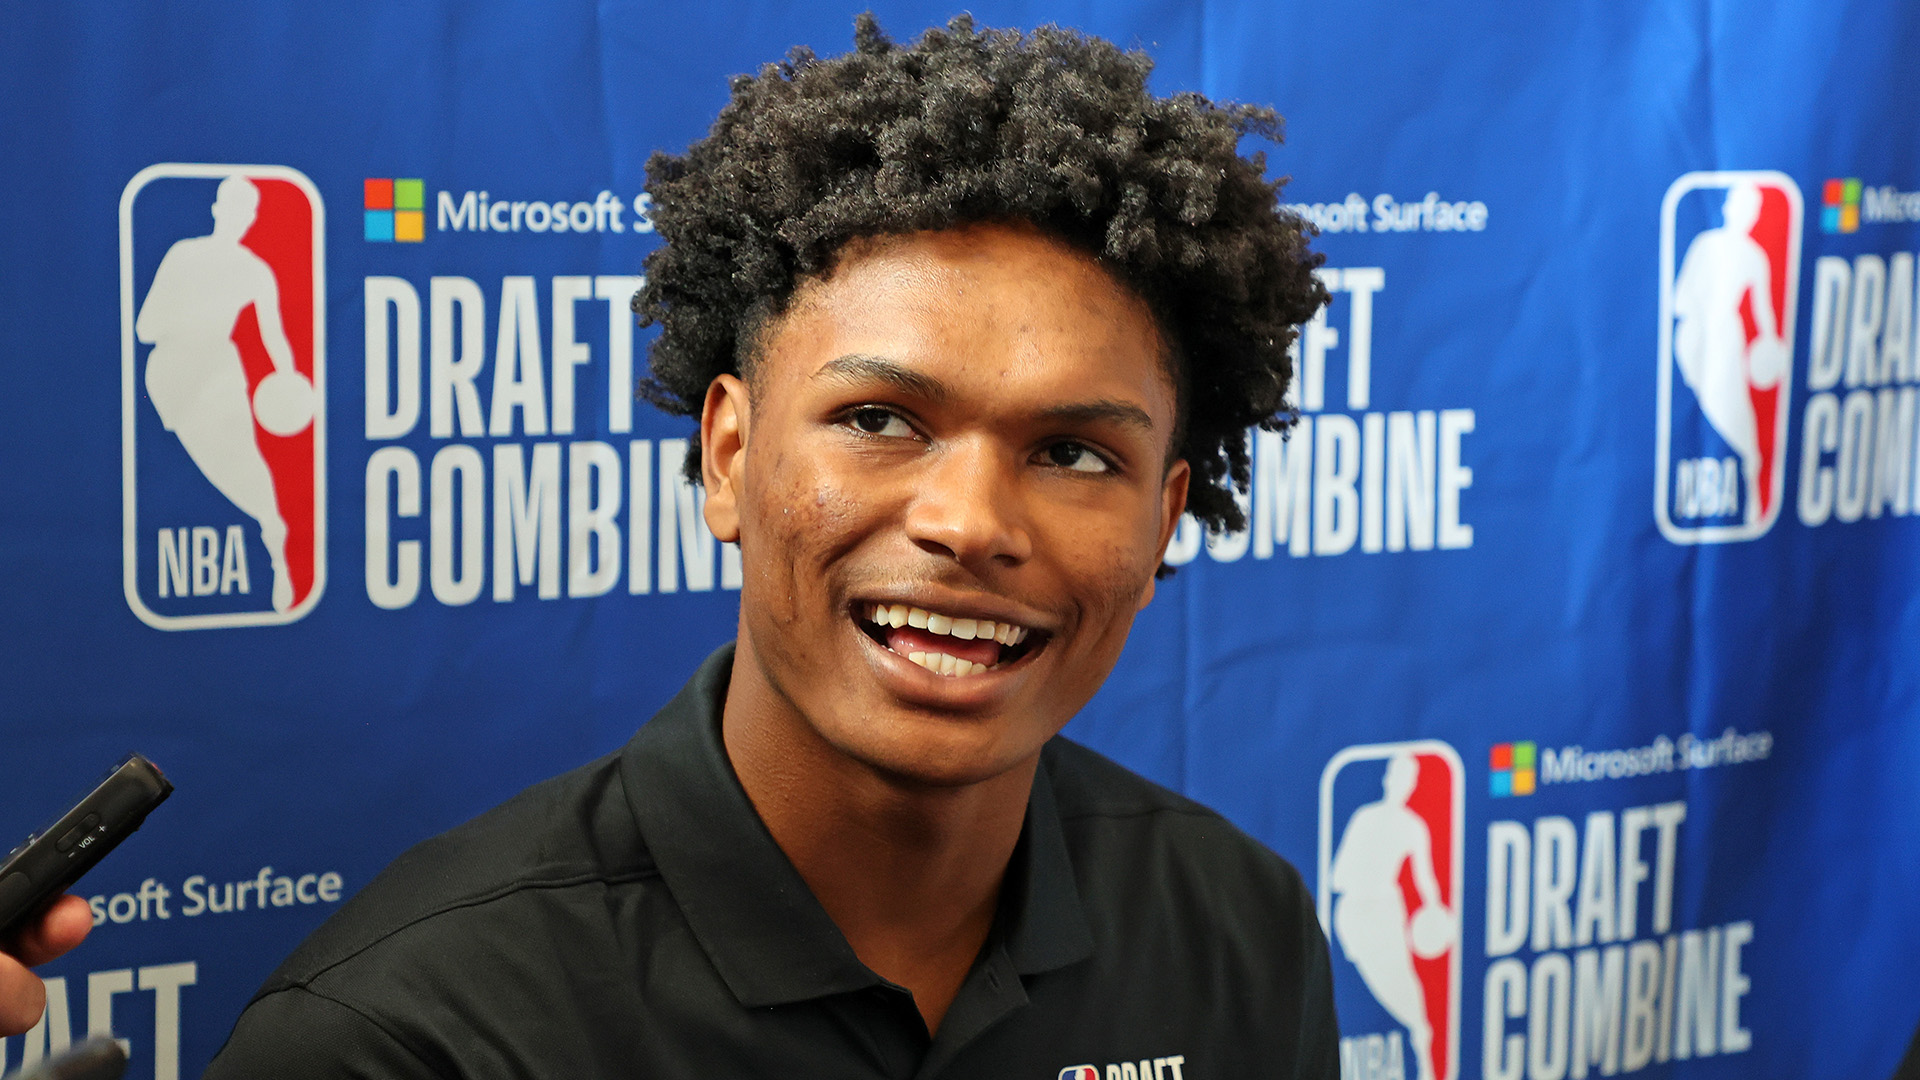 Amen Thompson speaks with the media during the NBA Draft Combine at the Wintrust Arena on May 17, 2023 in Chicago, Illinois.